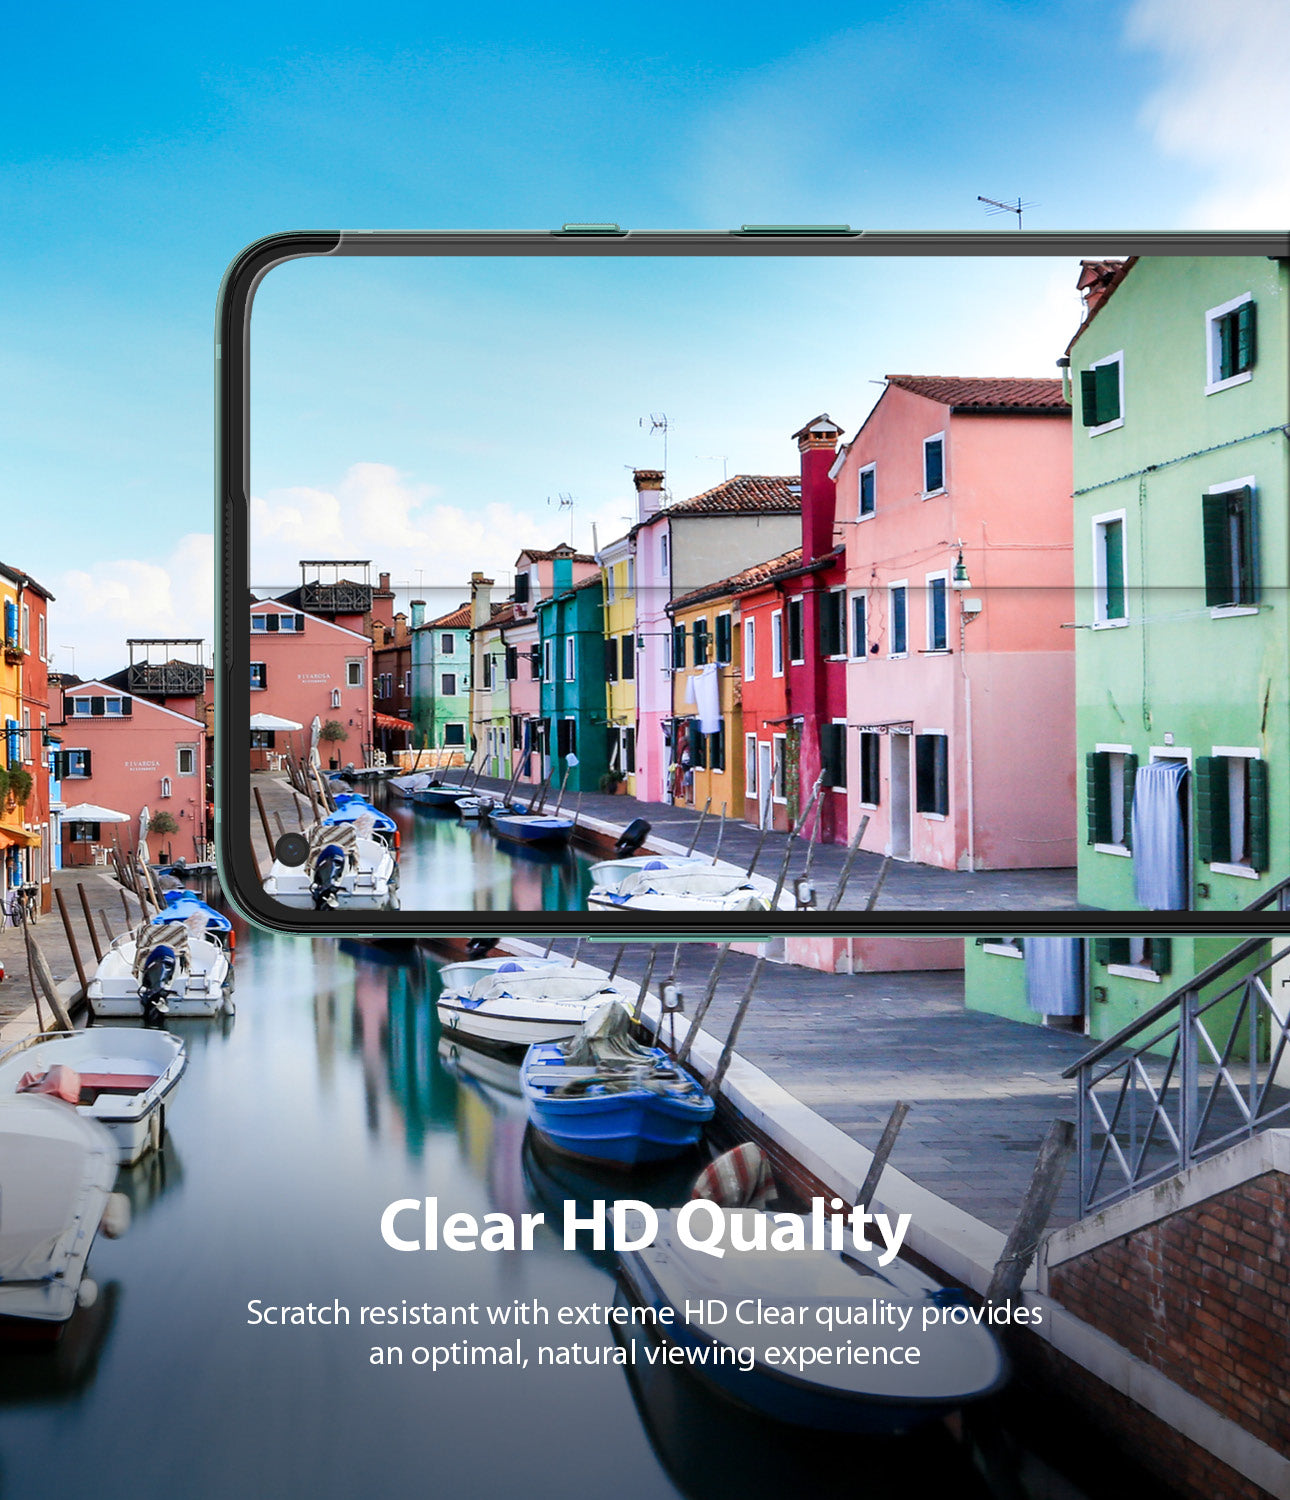 scratch resistant with extreme hd clear quality provides an optimal and natural viewing exprience